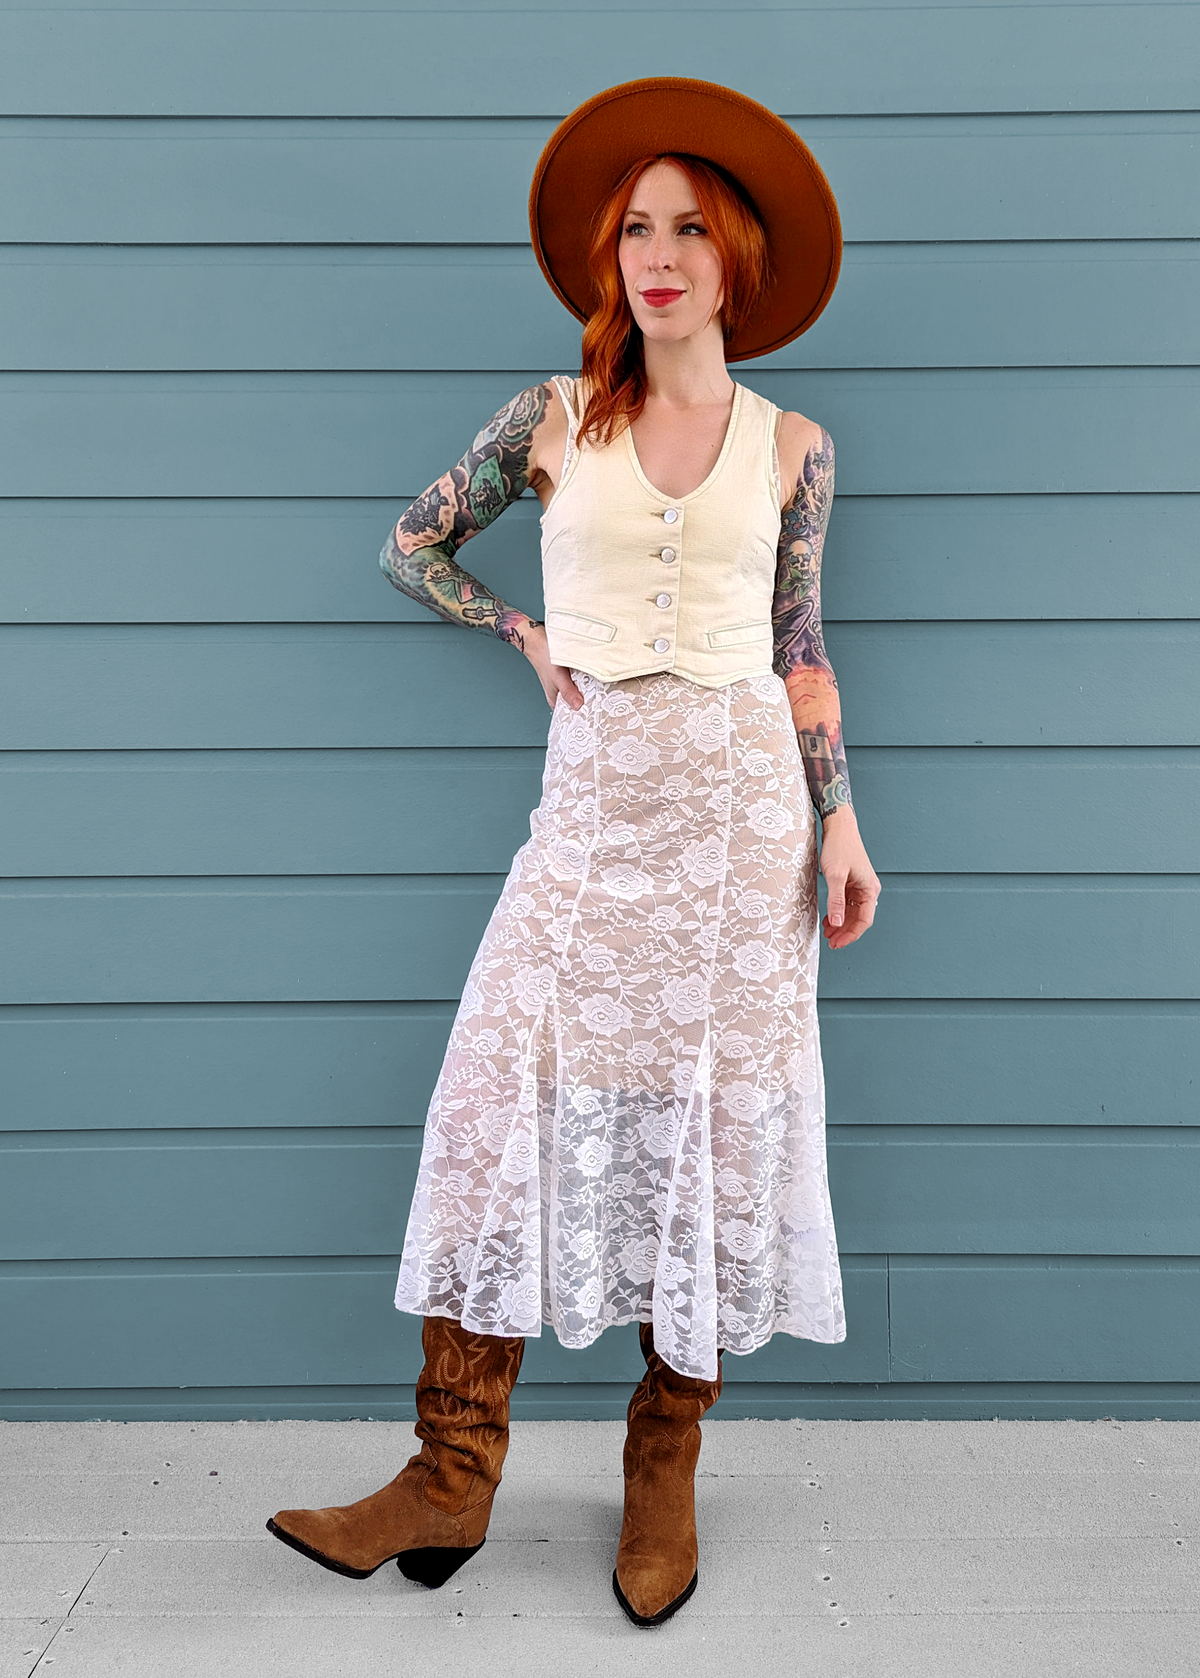 90s inspired sheer unlined white lace floral midi dress with sleeveless design and deep-v neckline - layered over a vest -  by Motel Rocks